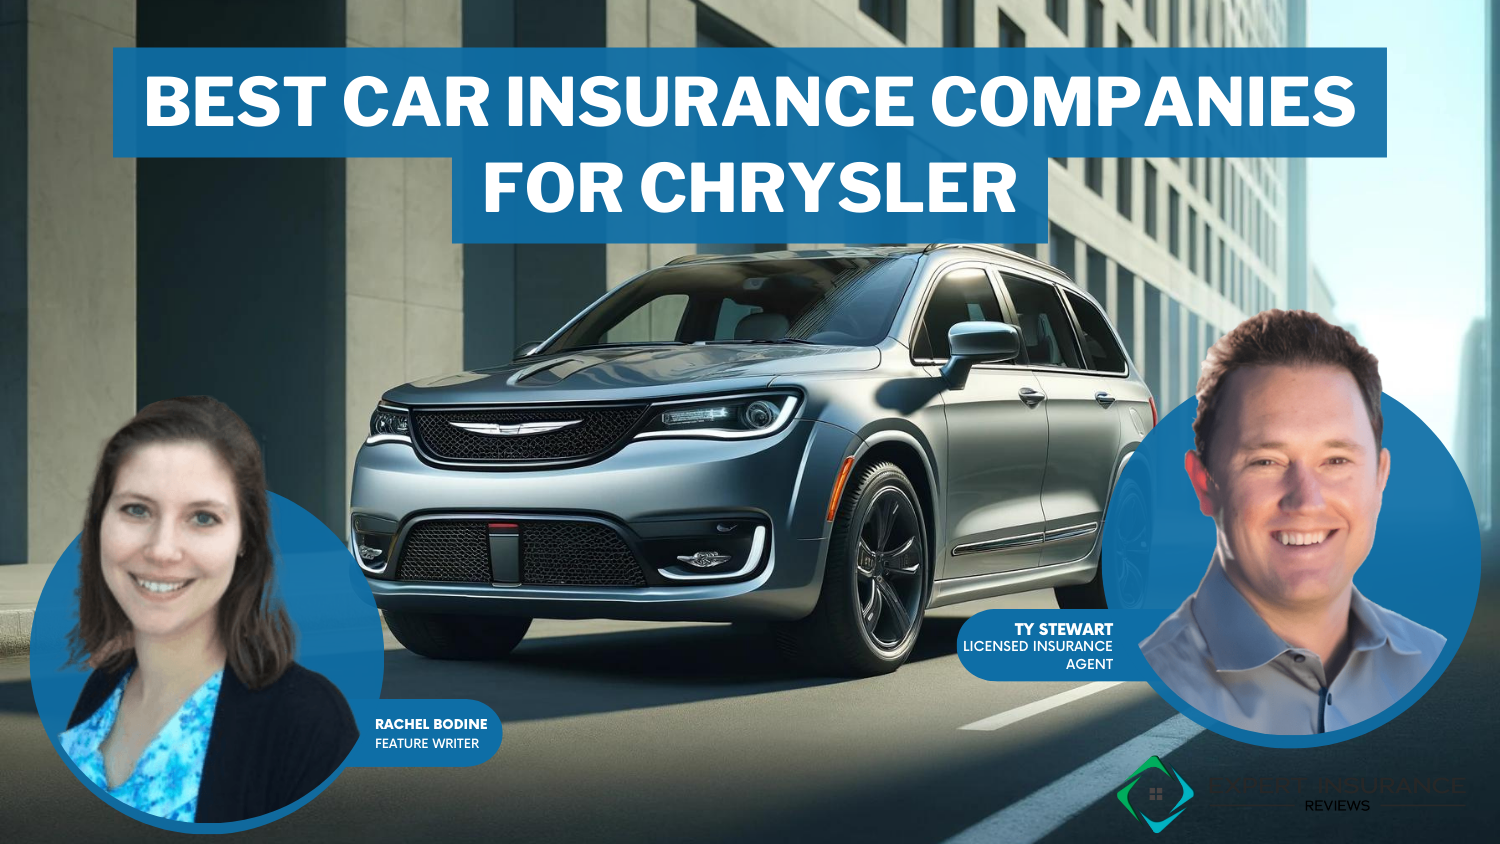 Best Car Insurance Companies for Chryslers: Geico, State Farm, and Progressive